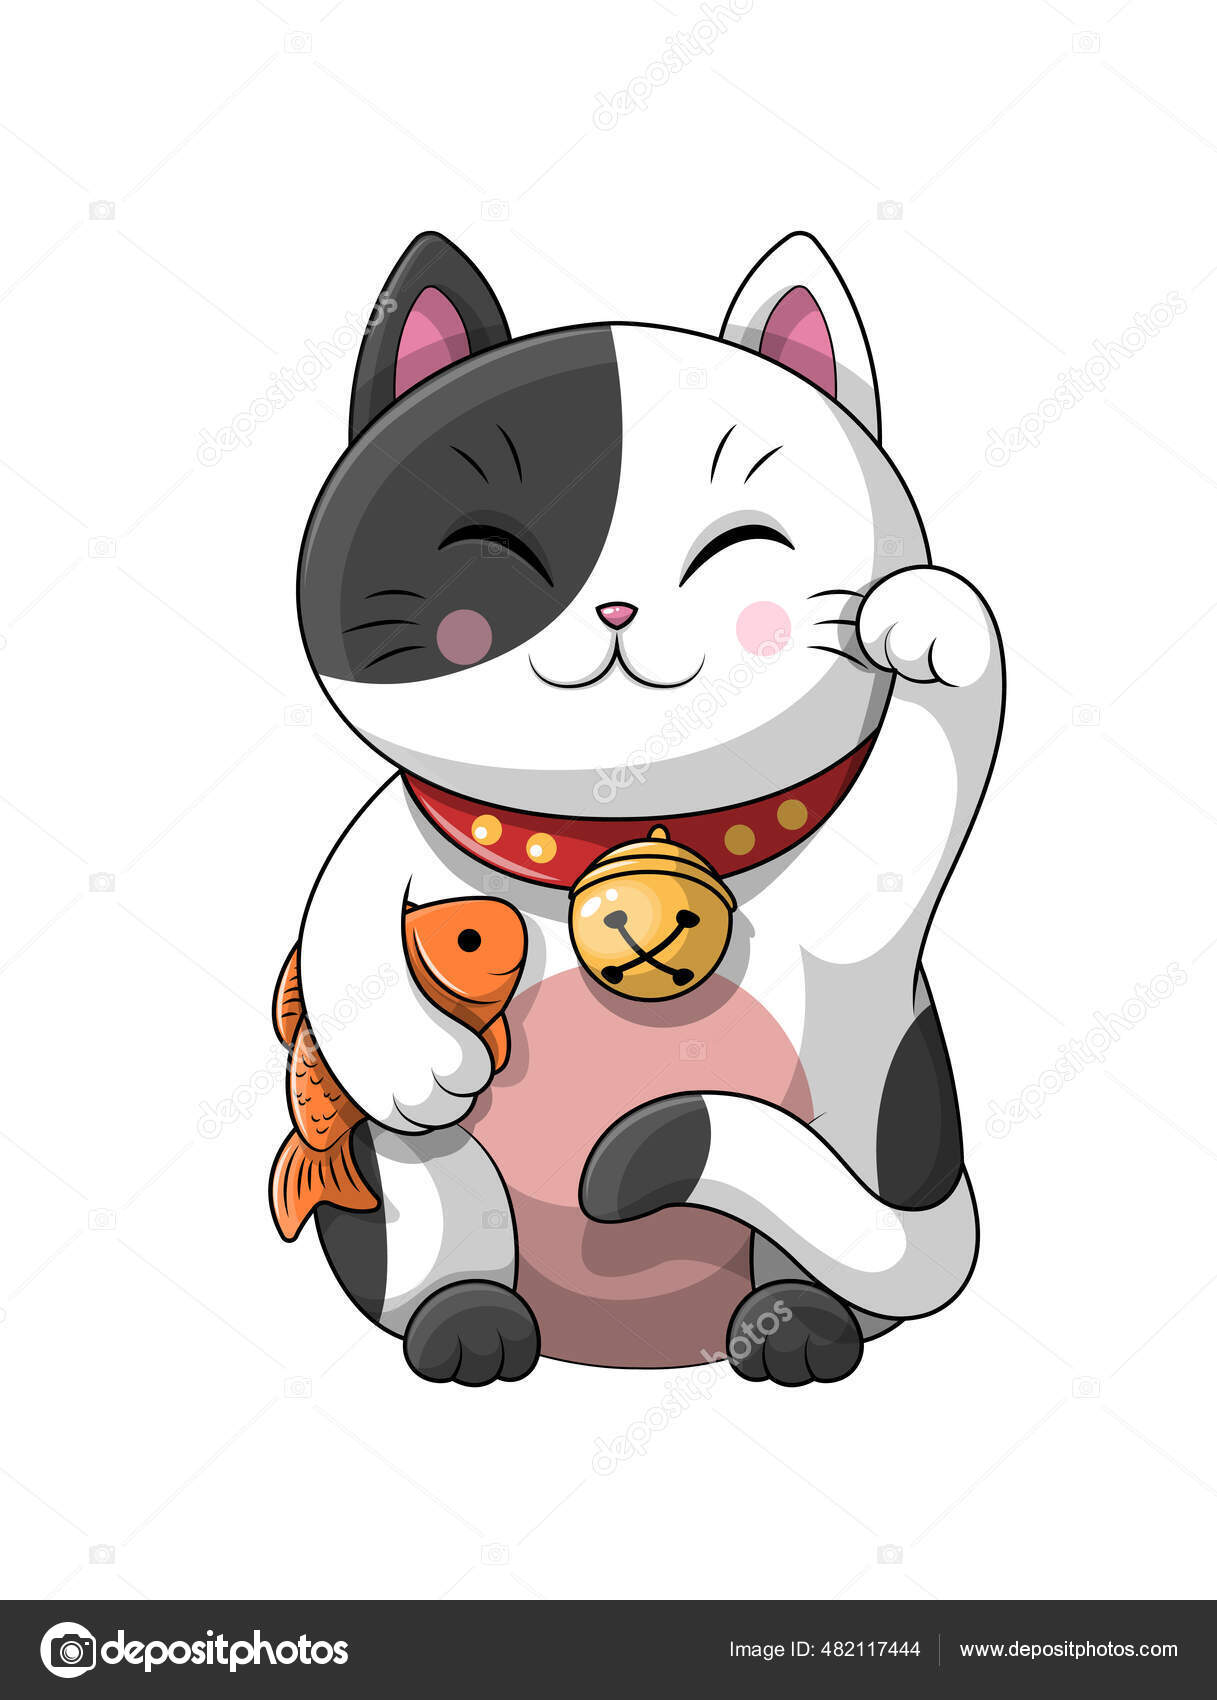 Kawaii Cartoon Cat. Funny Smiling Little Kitty with Pink Stripes